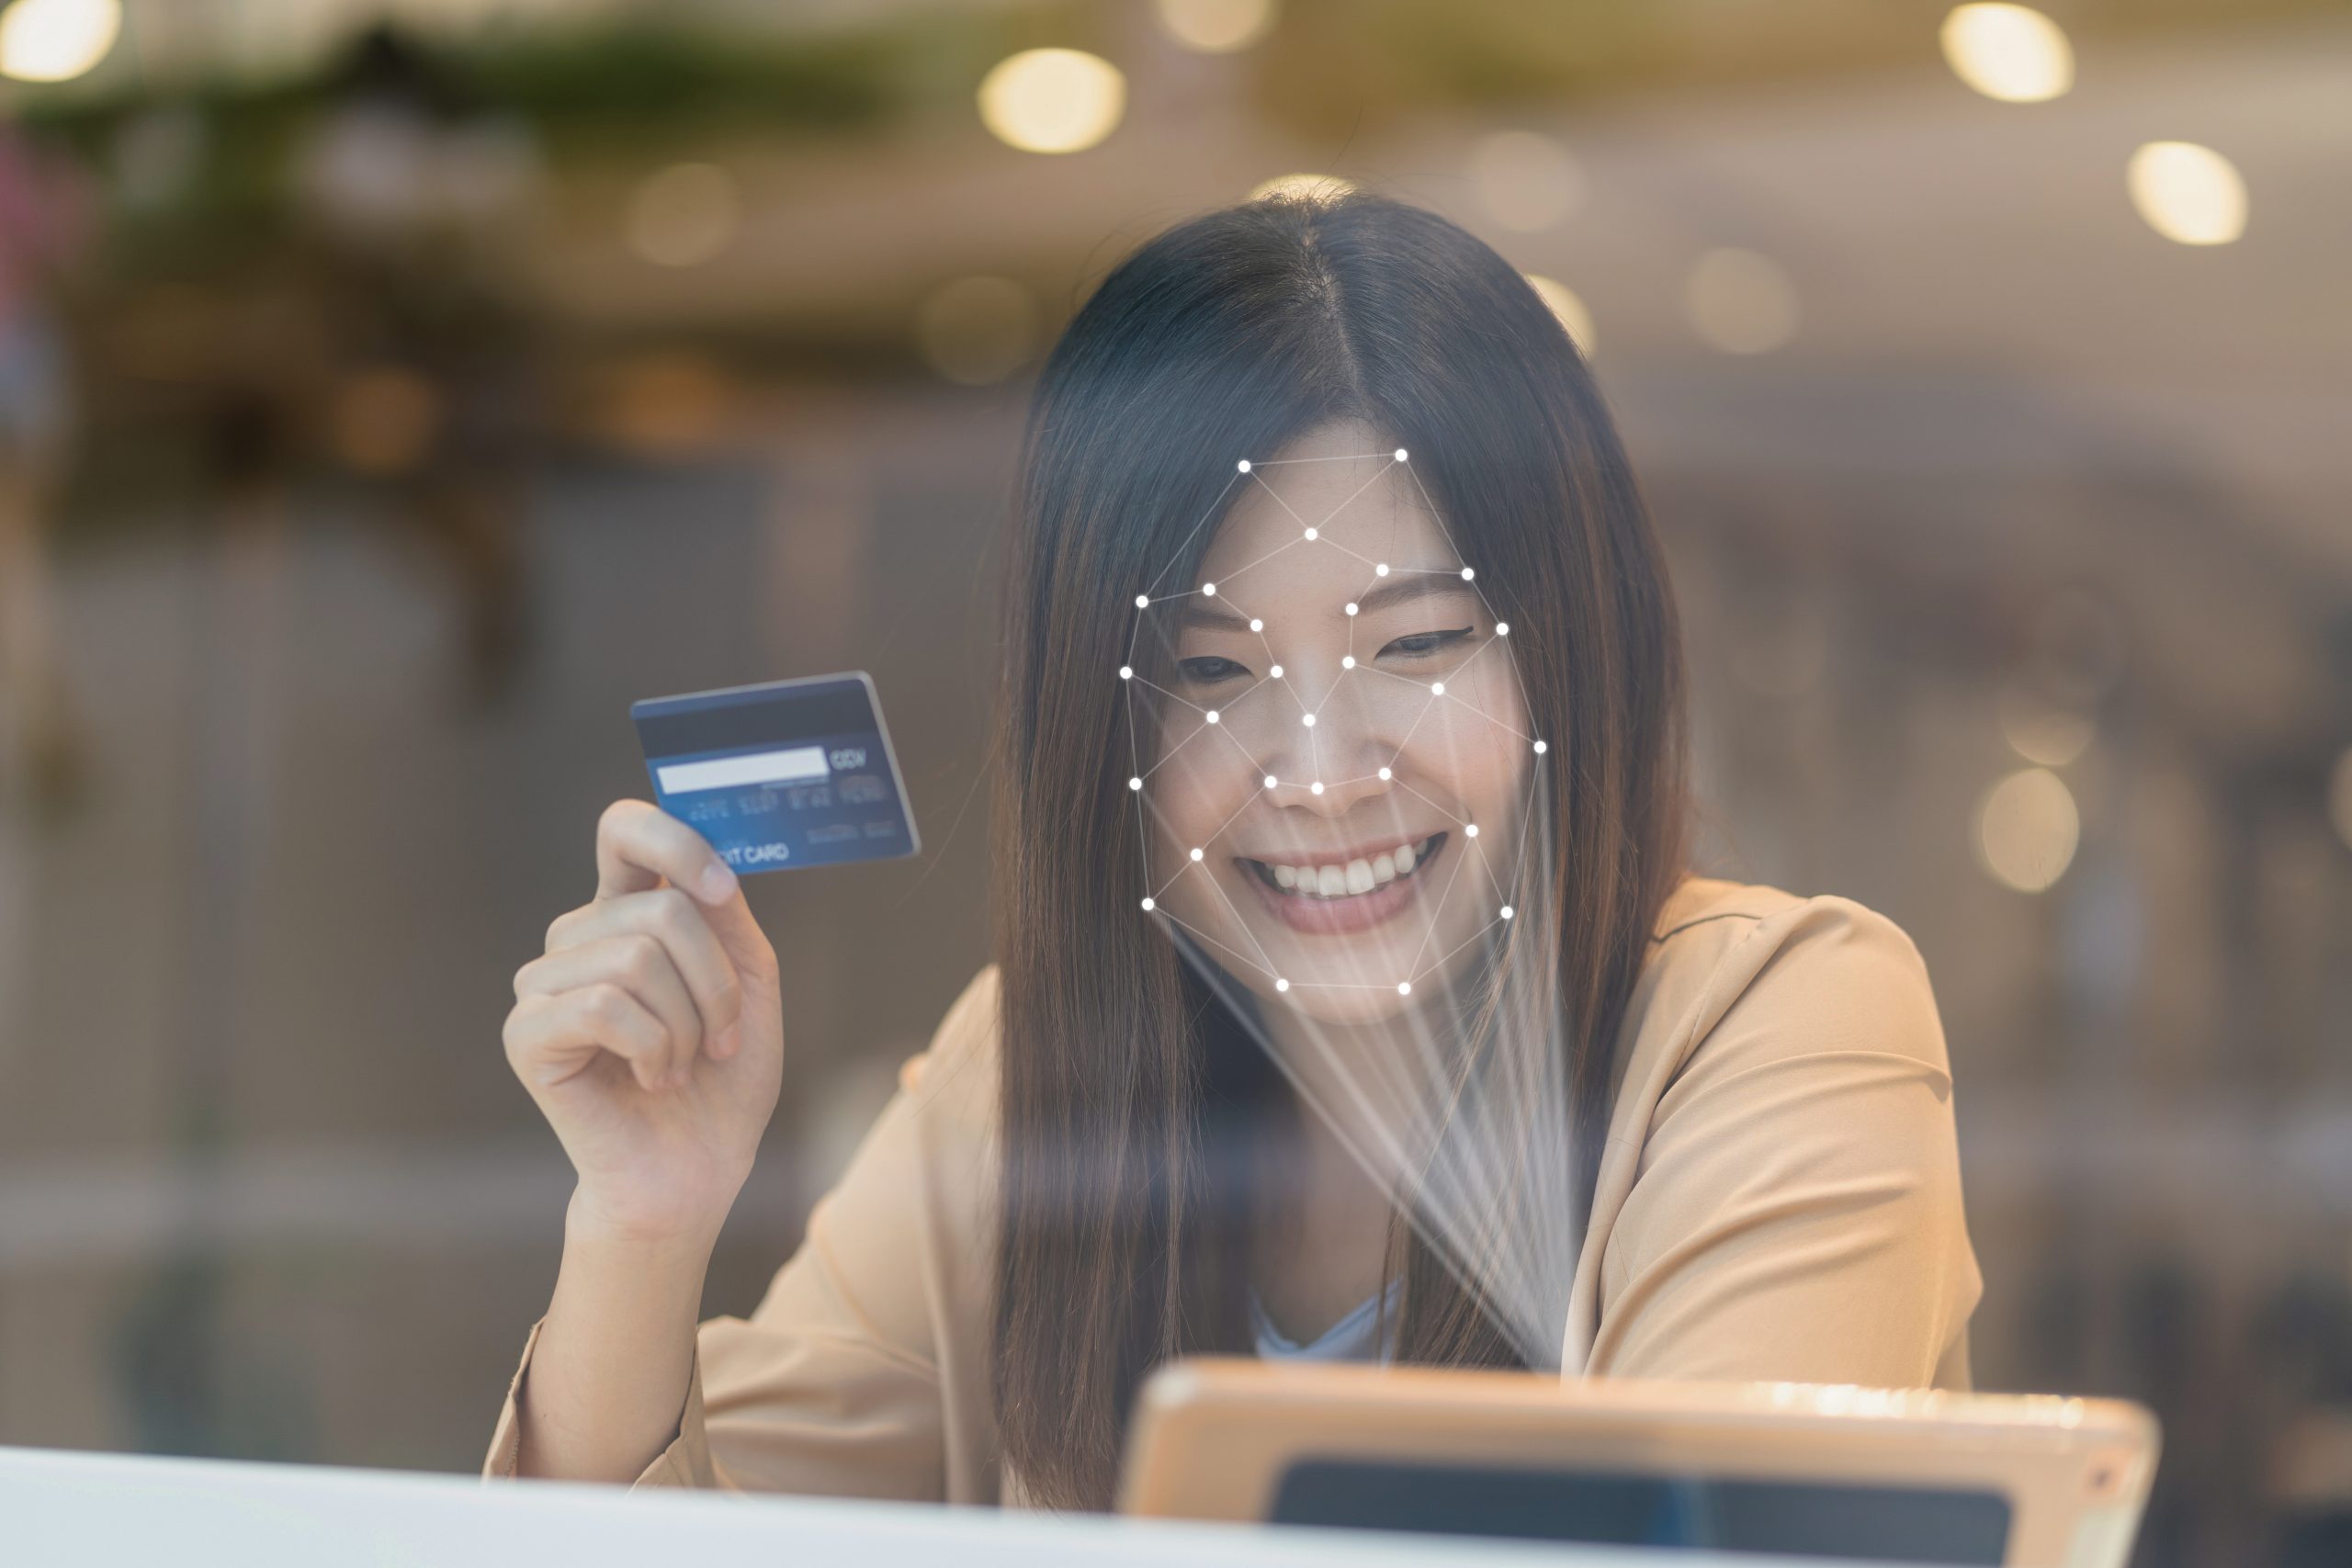 Biometric Payment Cards enable quicker checkouts